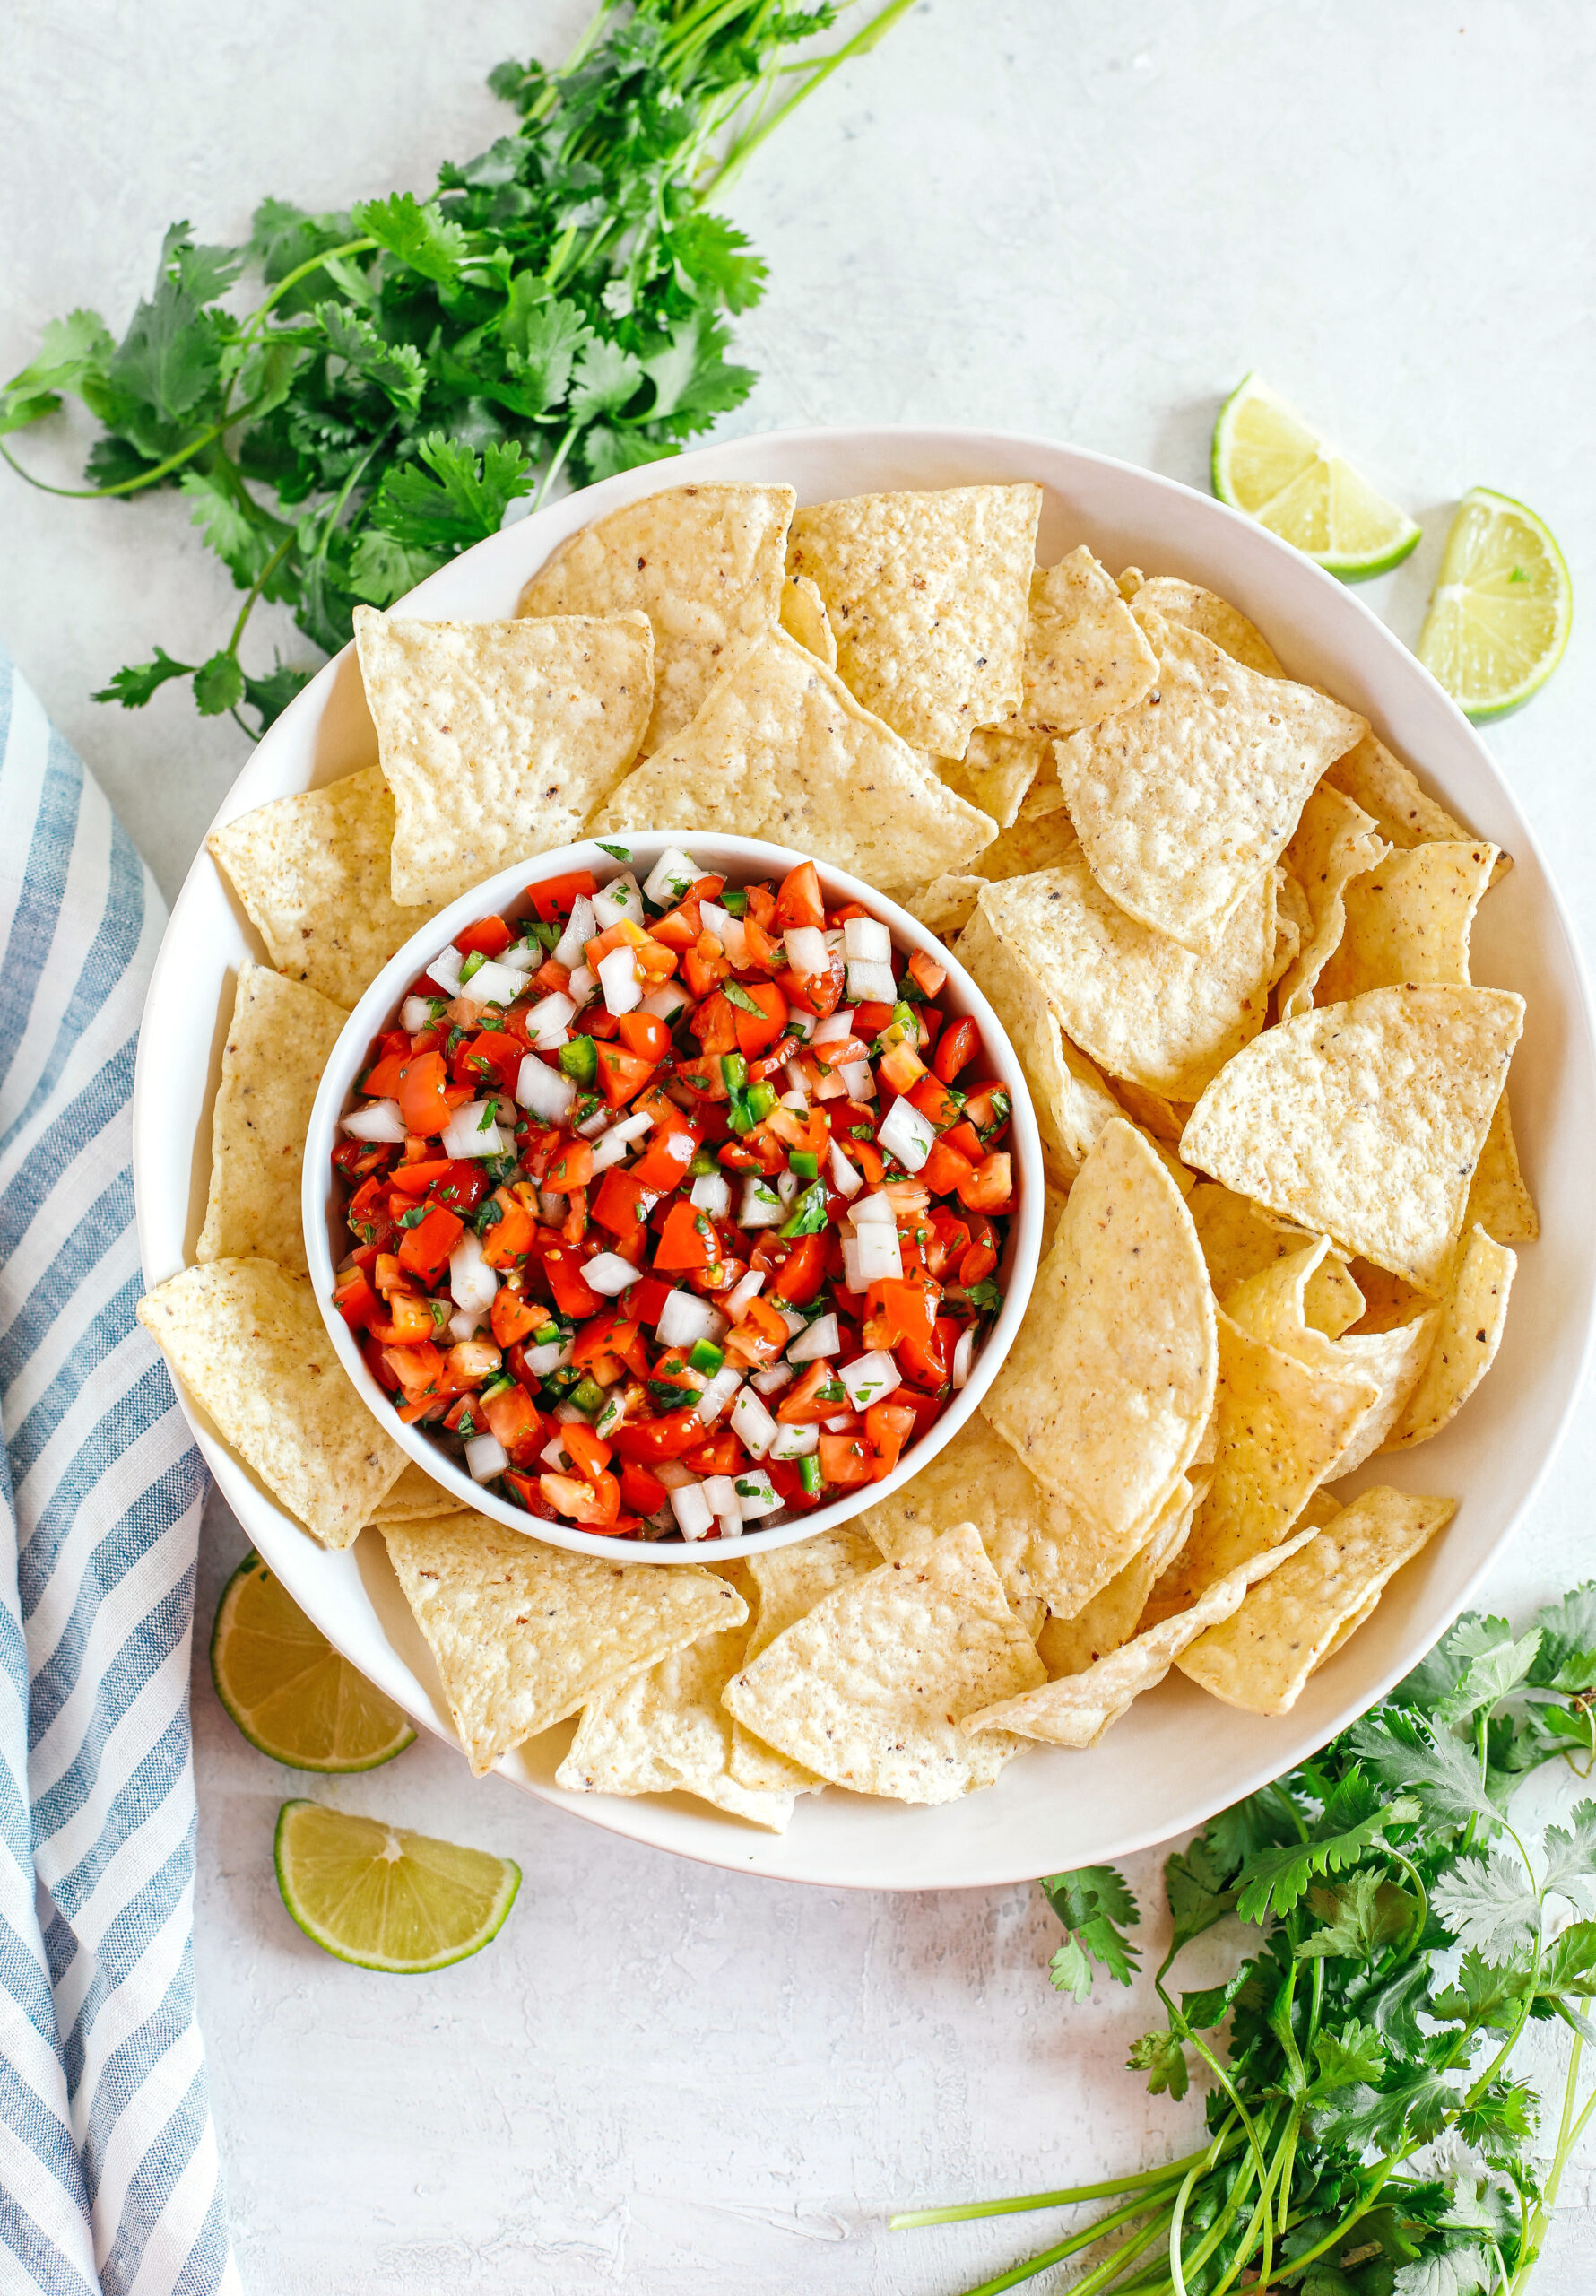 Fresh Homemade Pico De Gallo made with just a few simple ingredients for the perfect flavor boost to any healthy meal or serve as a delicious salsa with chips!